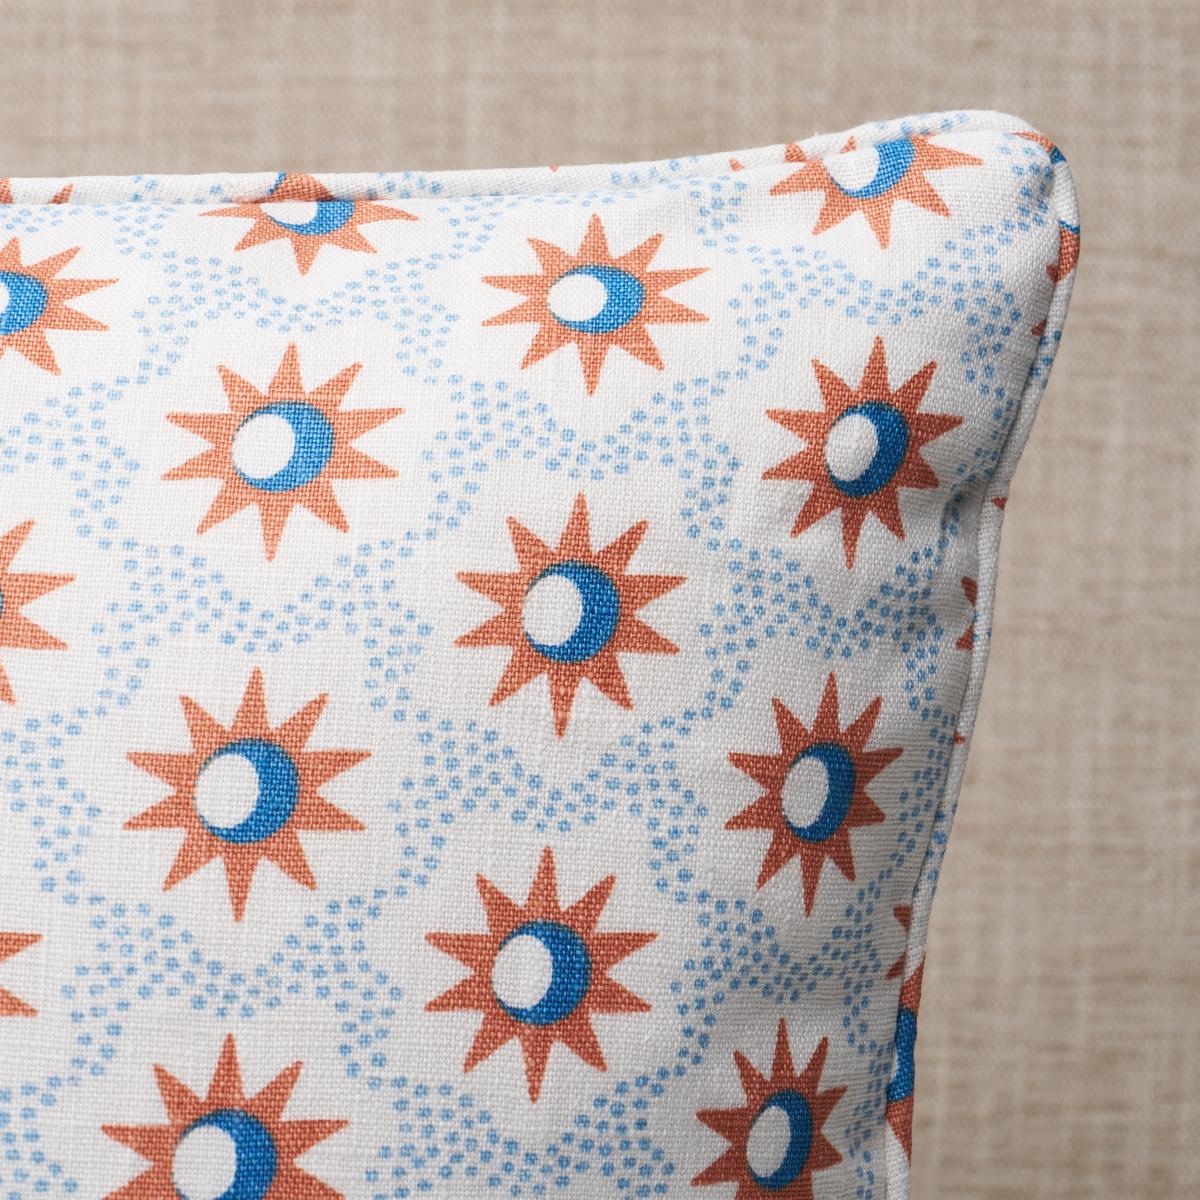 This pillow features Lucie with a self welt finish. The lively starbursts and crescent moons of Lucie fabric add celestial charm to any scheme. Pillow includes a feather/down fill insert and hidden zipper closure.